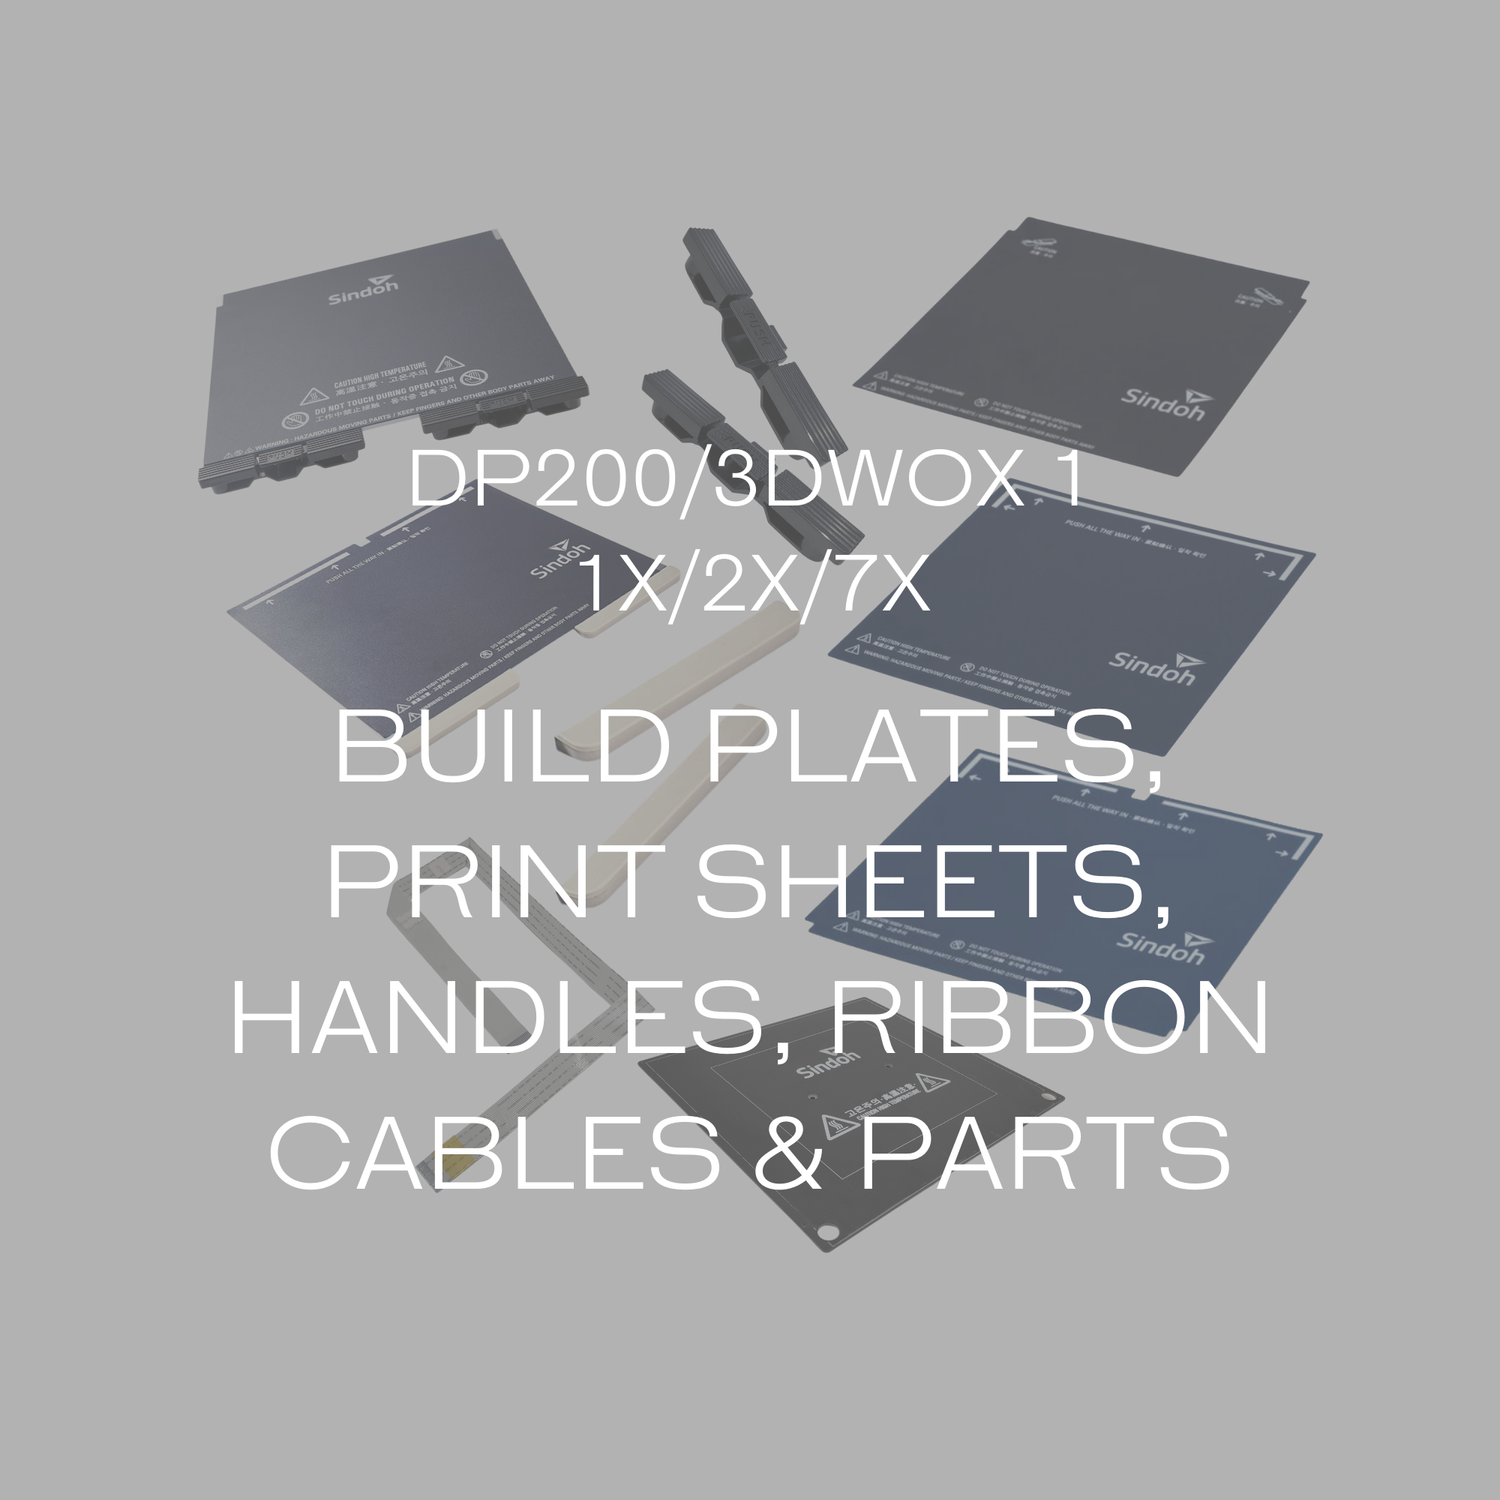 vogn Bemærk nyheder Build Plates, Print Sheets, Handles, Ribbon Cables and Part for Sindoh  DP200, 3DWOX 1, 1X , 2X and 7X 3D Printers — Zacarias Engineering